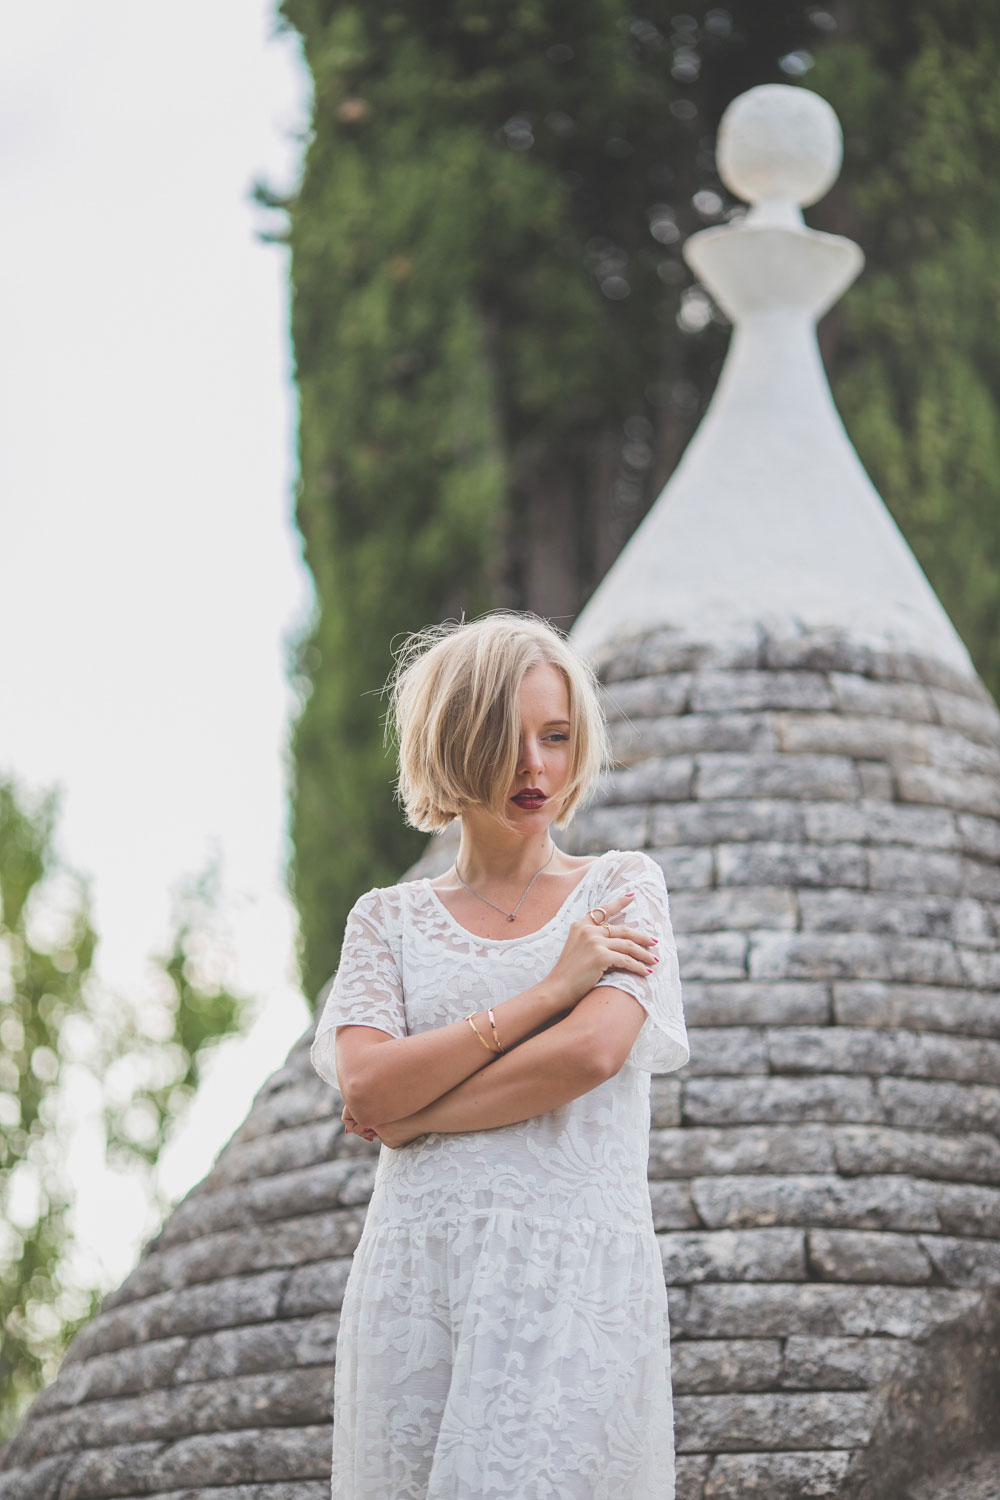 darya-kamalova-thecablook-fashion-lifestyle-blogger-from-thecablook-com-in-agri-trulli-in-puglia-south-italy-wearing-gat-rimon-white-maxi-lace-dress-4024